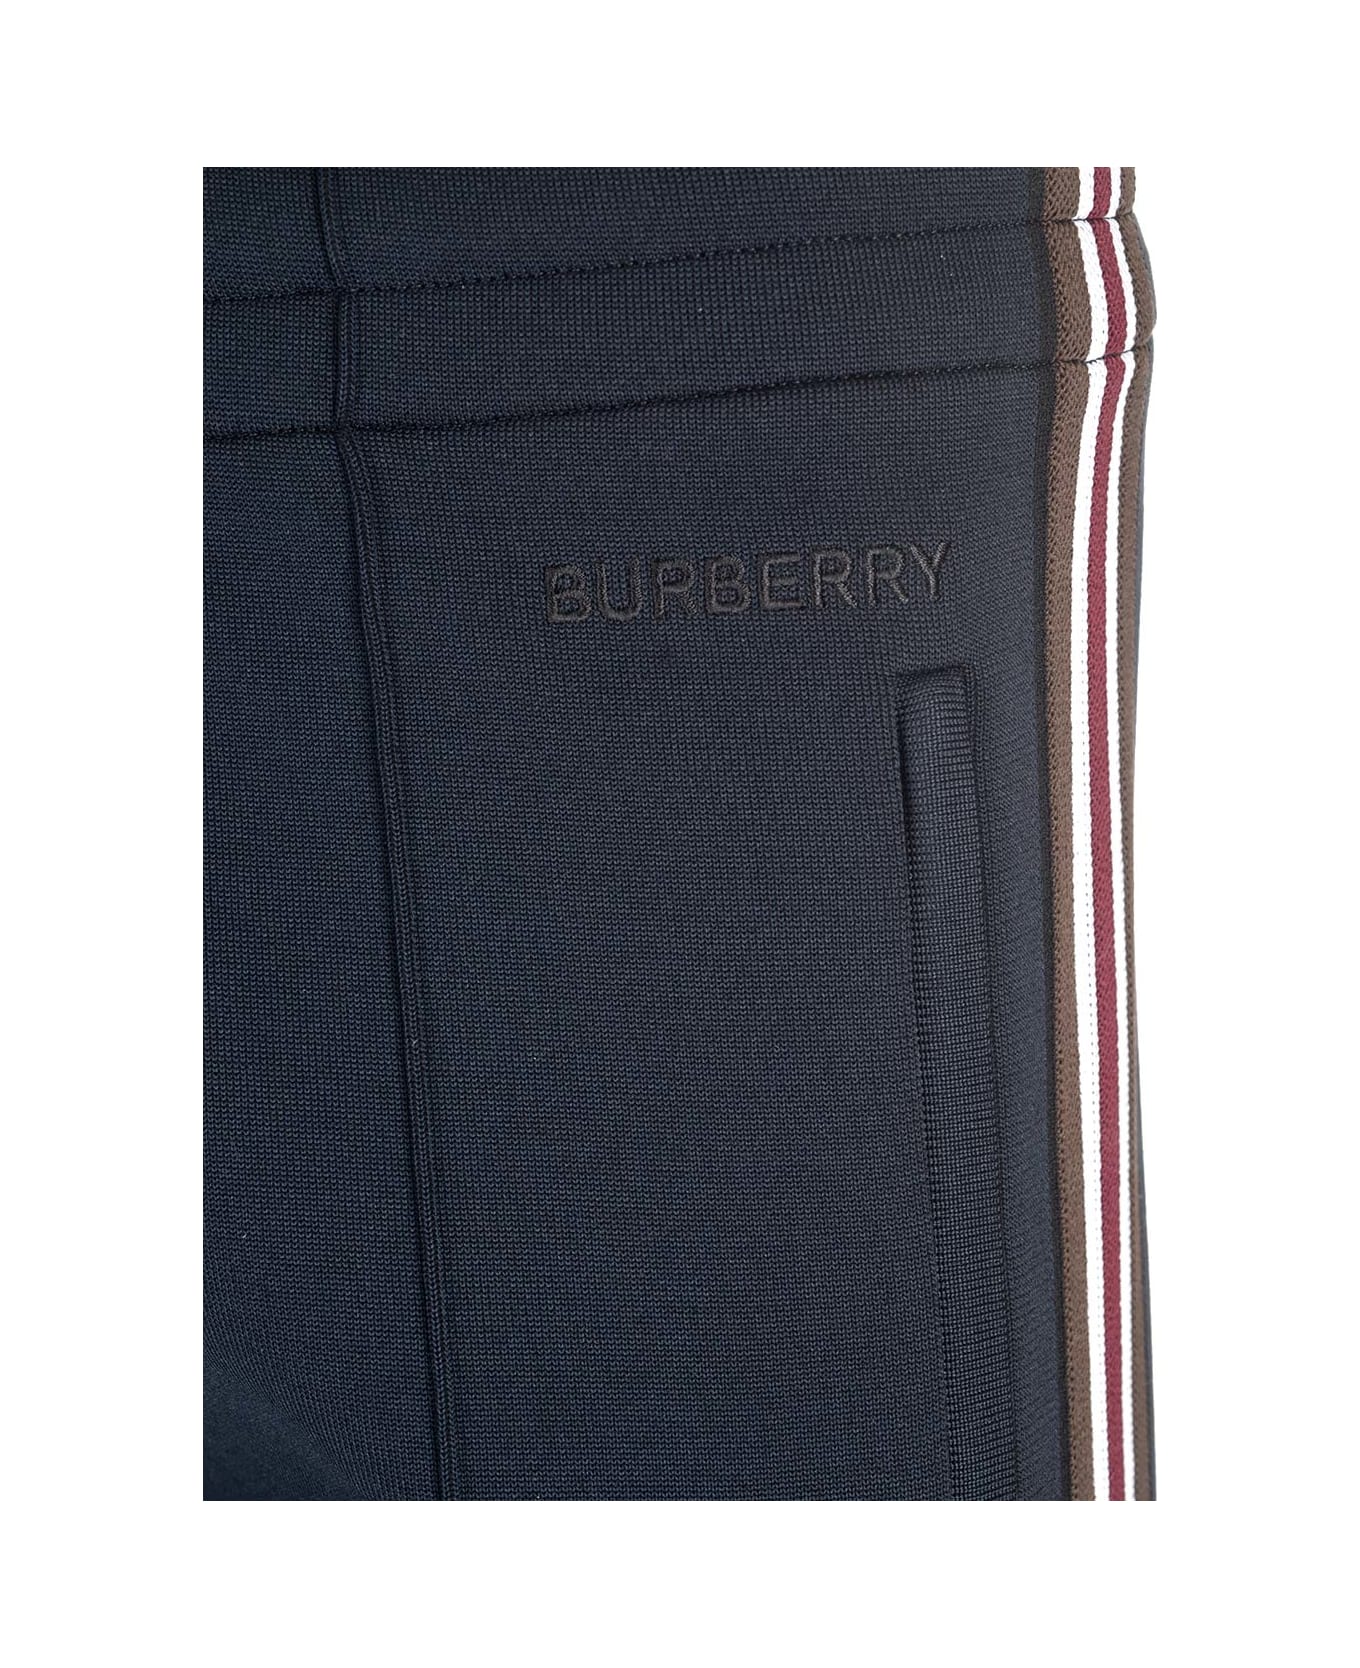 Burberry Pants With Striped Bands - Blue ボトムス